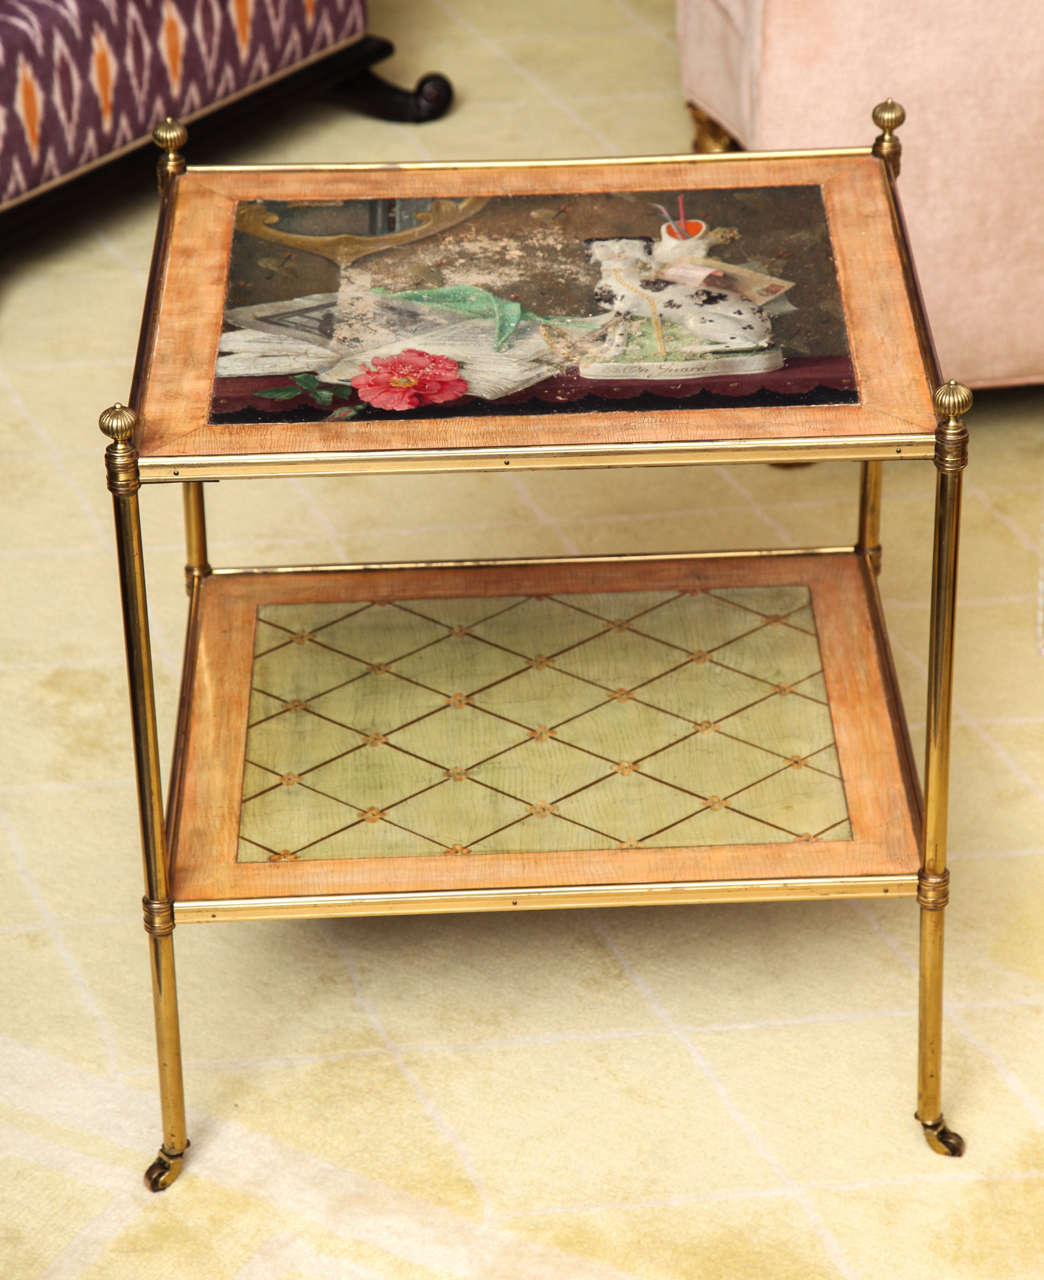 Painted table with brass mounts and casters. The top is inset with a still life painting of a china dog, glove, flower and book.
American, c. 1950